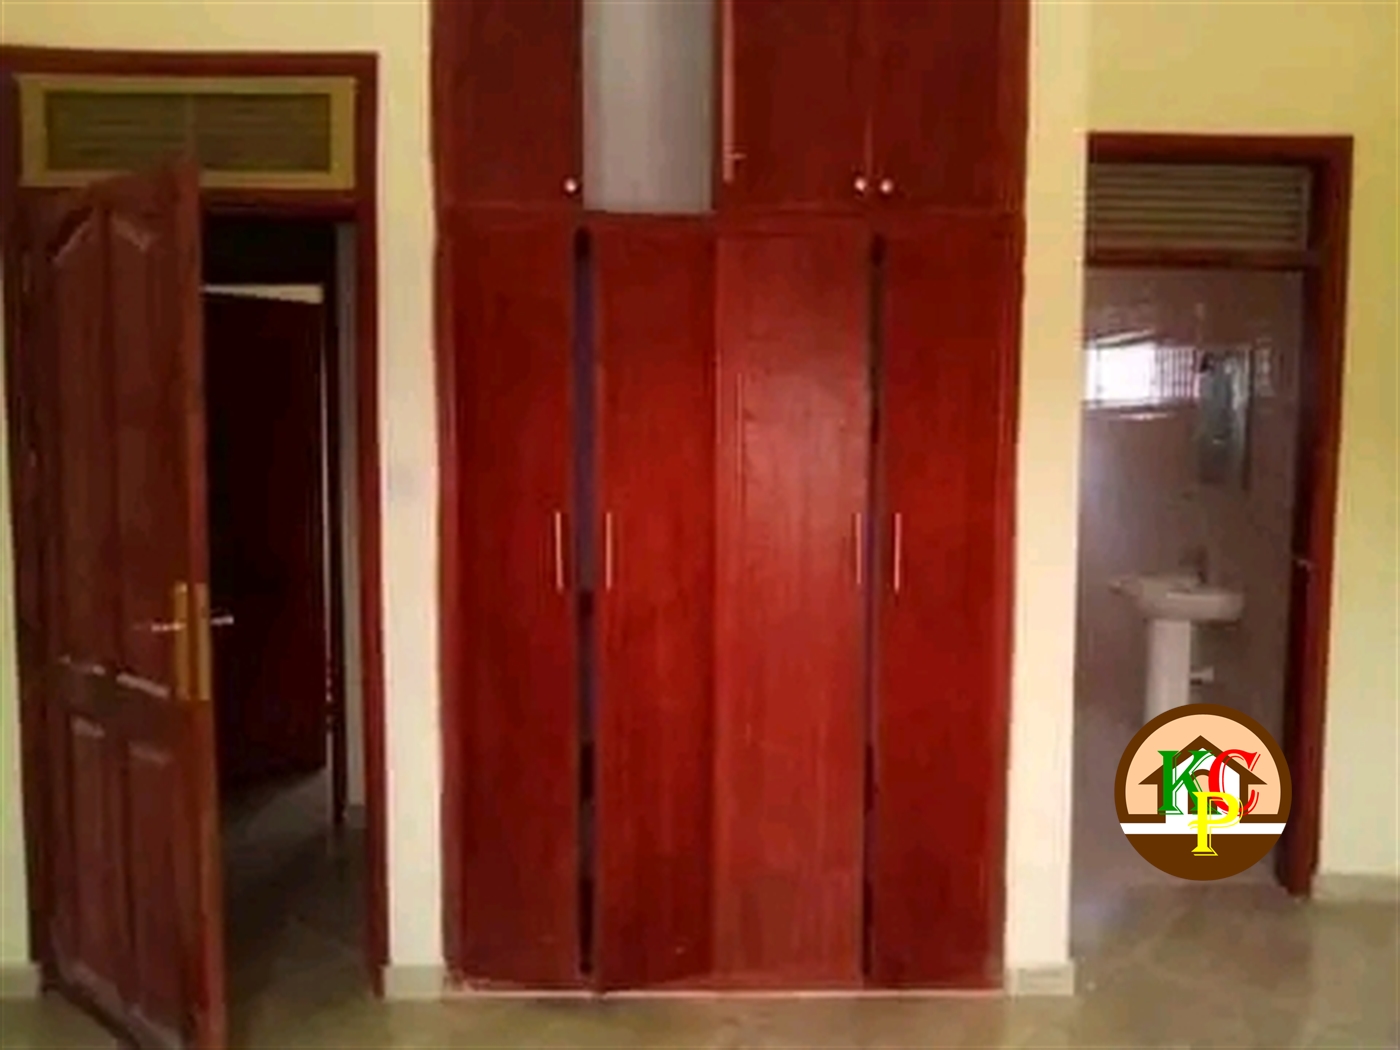 Semi Detached for rent in Bweyogerere Wakiso